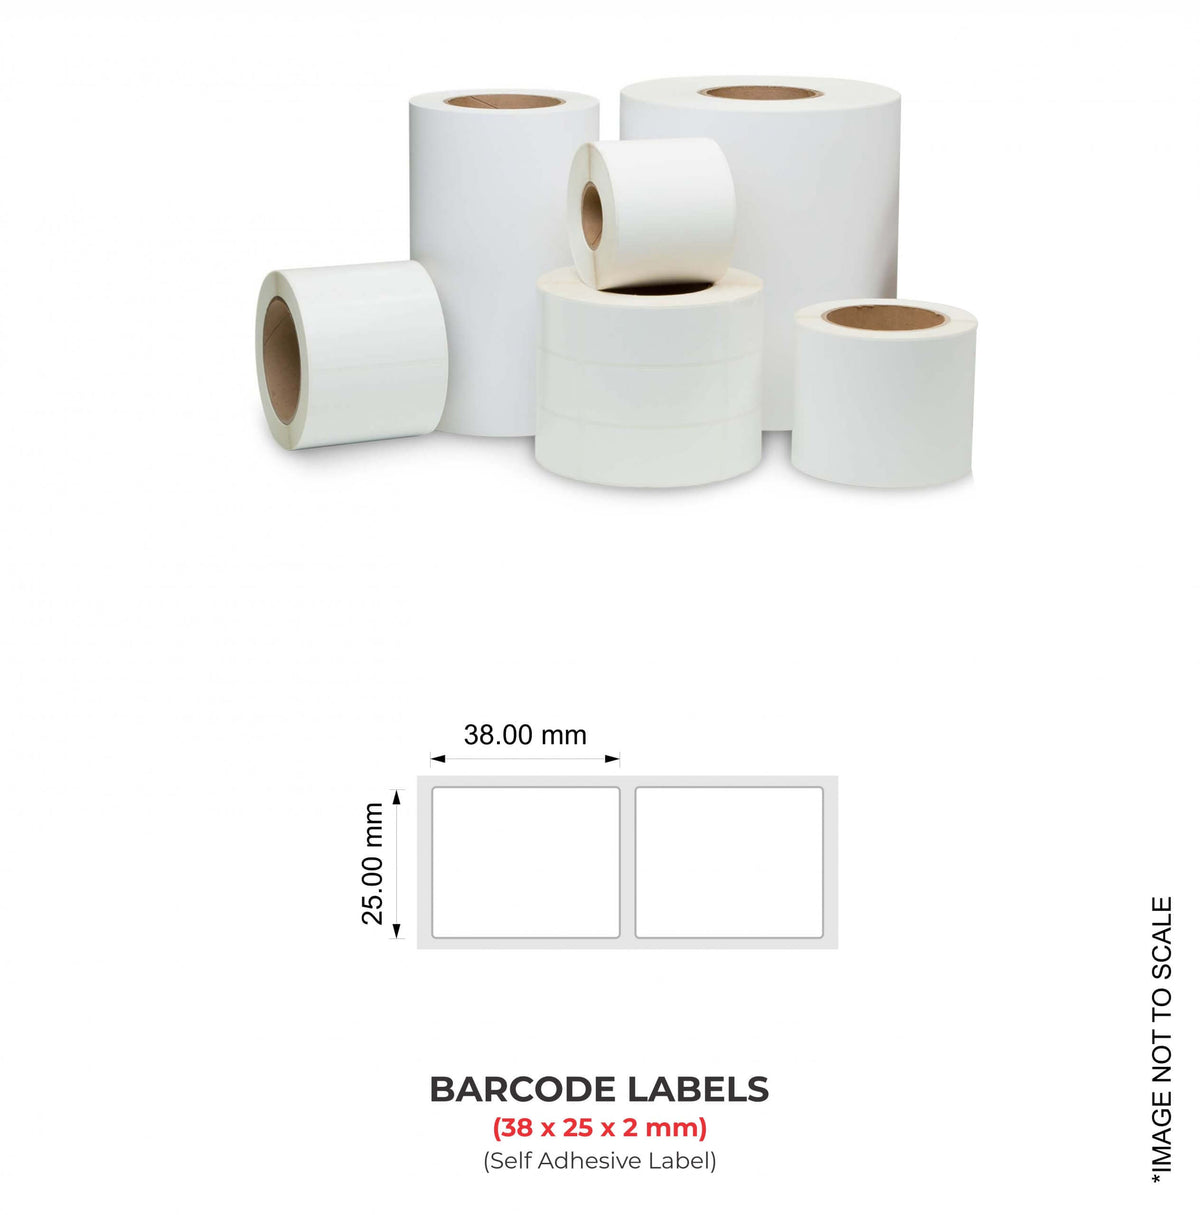 Barcode Labels (38mm x 25mm x 2) (1.5" x 1"), 4000 Labels Per Roll (Self Adhesive Label)